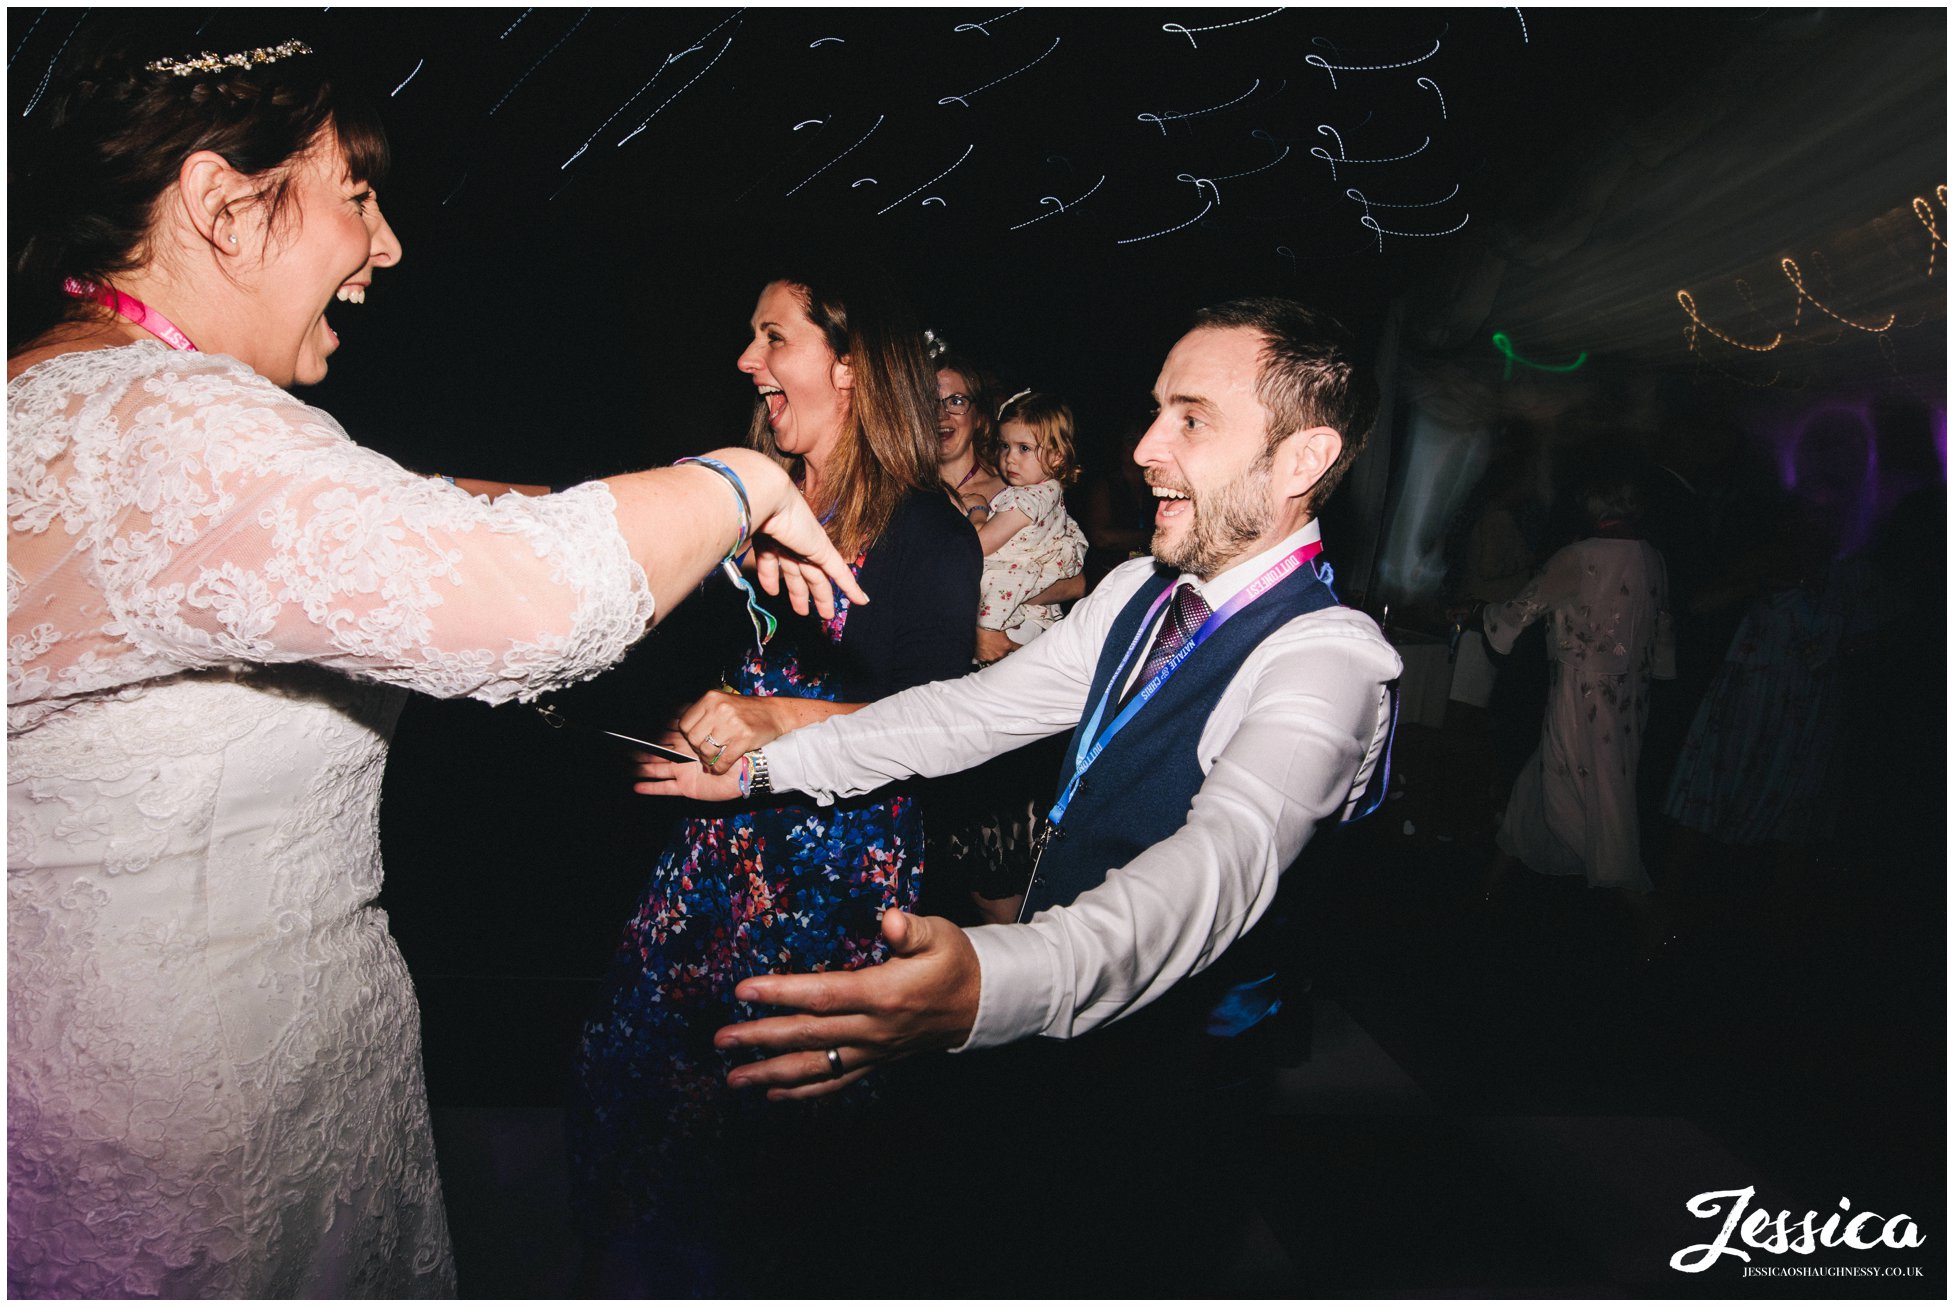 guests run on to dancefloor to join the couple